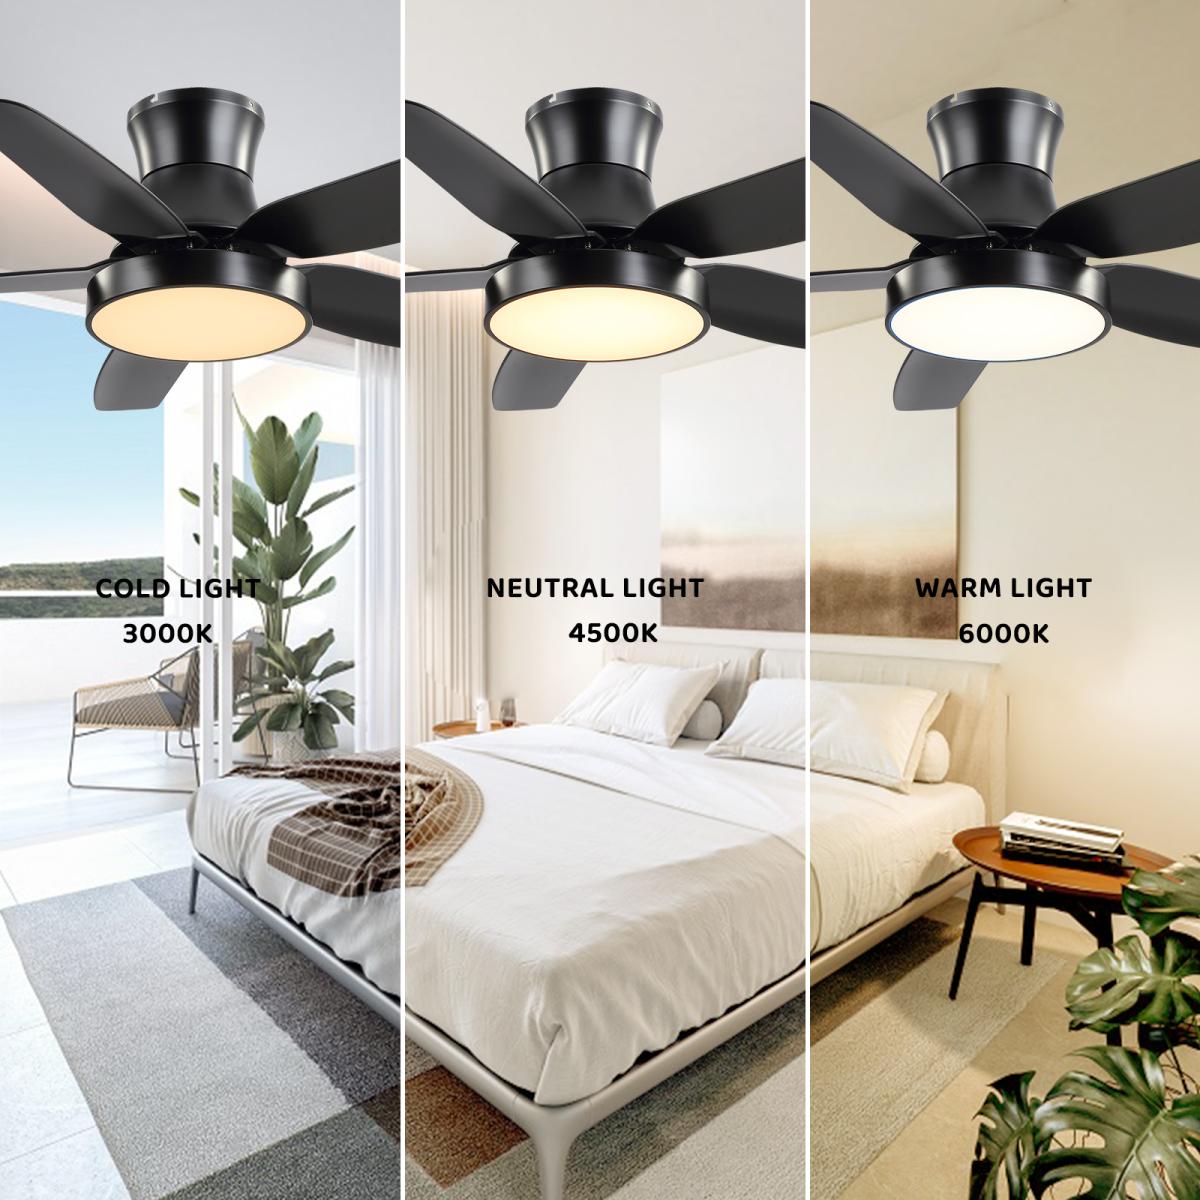 46 Inch Black Flush Mount Ceiling Fan with Light and Remote Control, Low Profile Ceiling Fan with 5 blades, 3 Light Color, 6 Speeds for Living Room, Bedroom, Children room, Matte Black